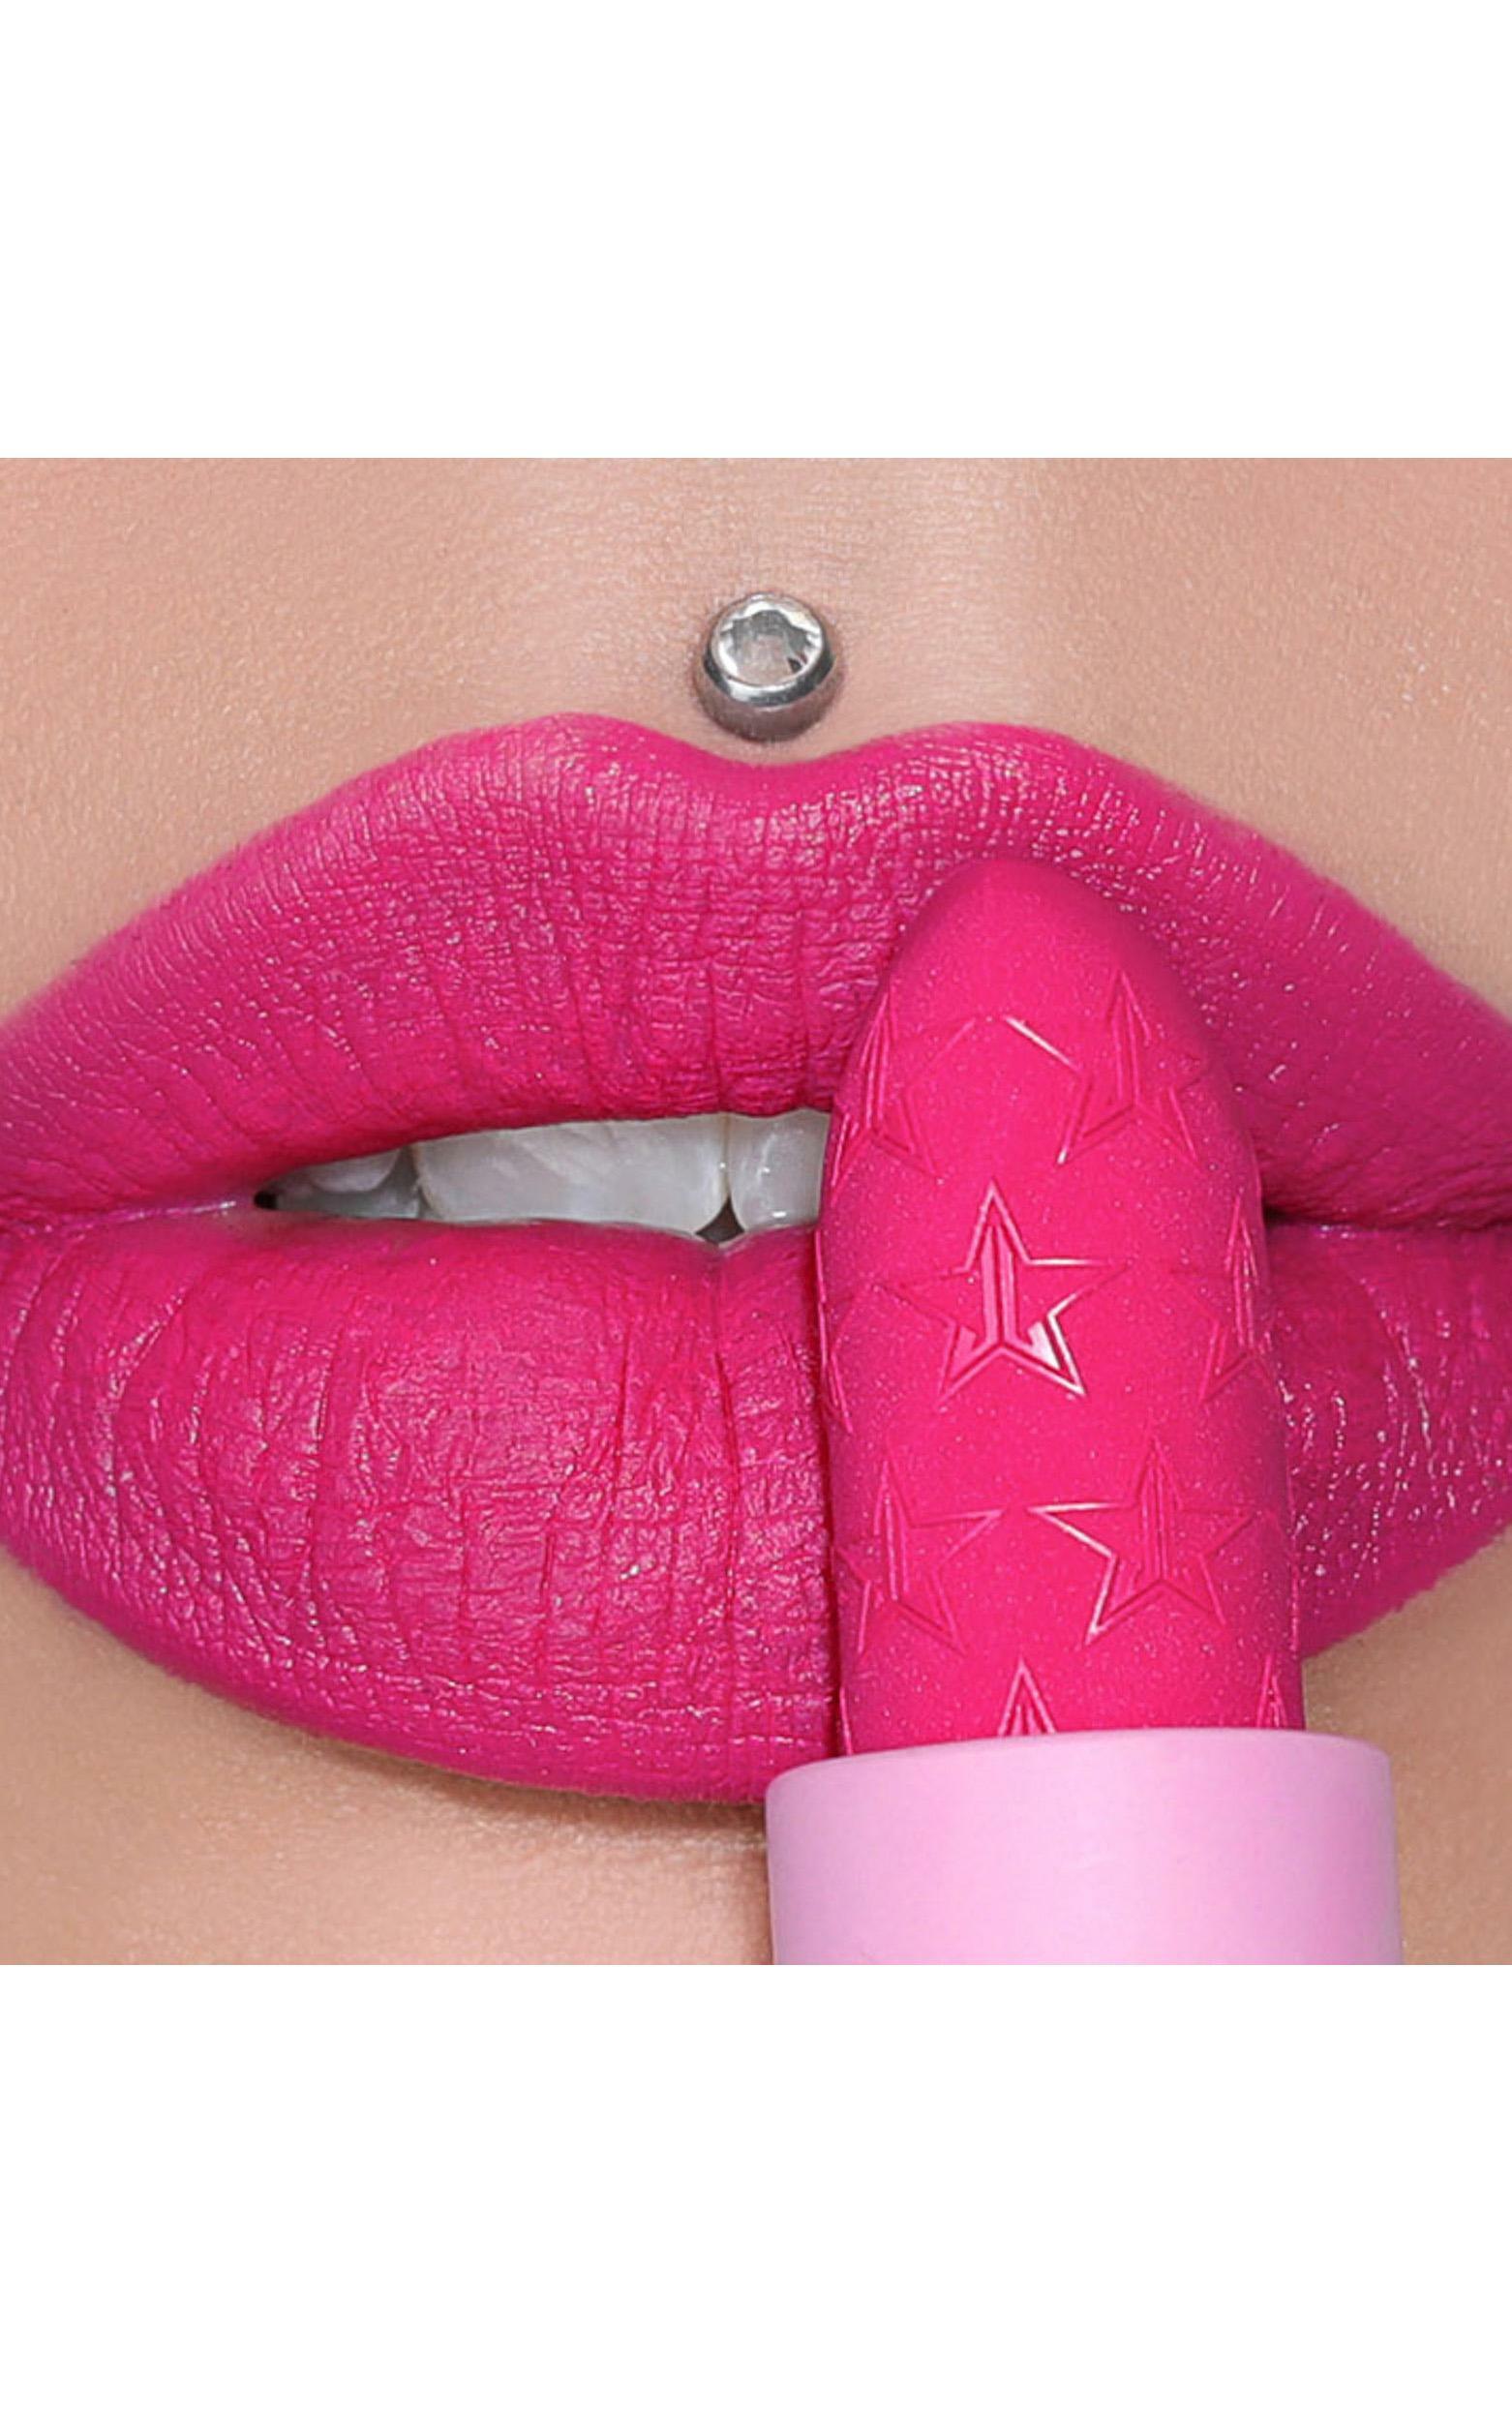 Jeffree Star Cosmetics - Velvet Trap Lipstick in Hot Commodity, PNK3, hi-res image number null